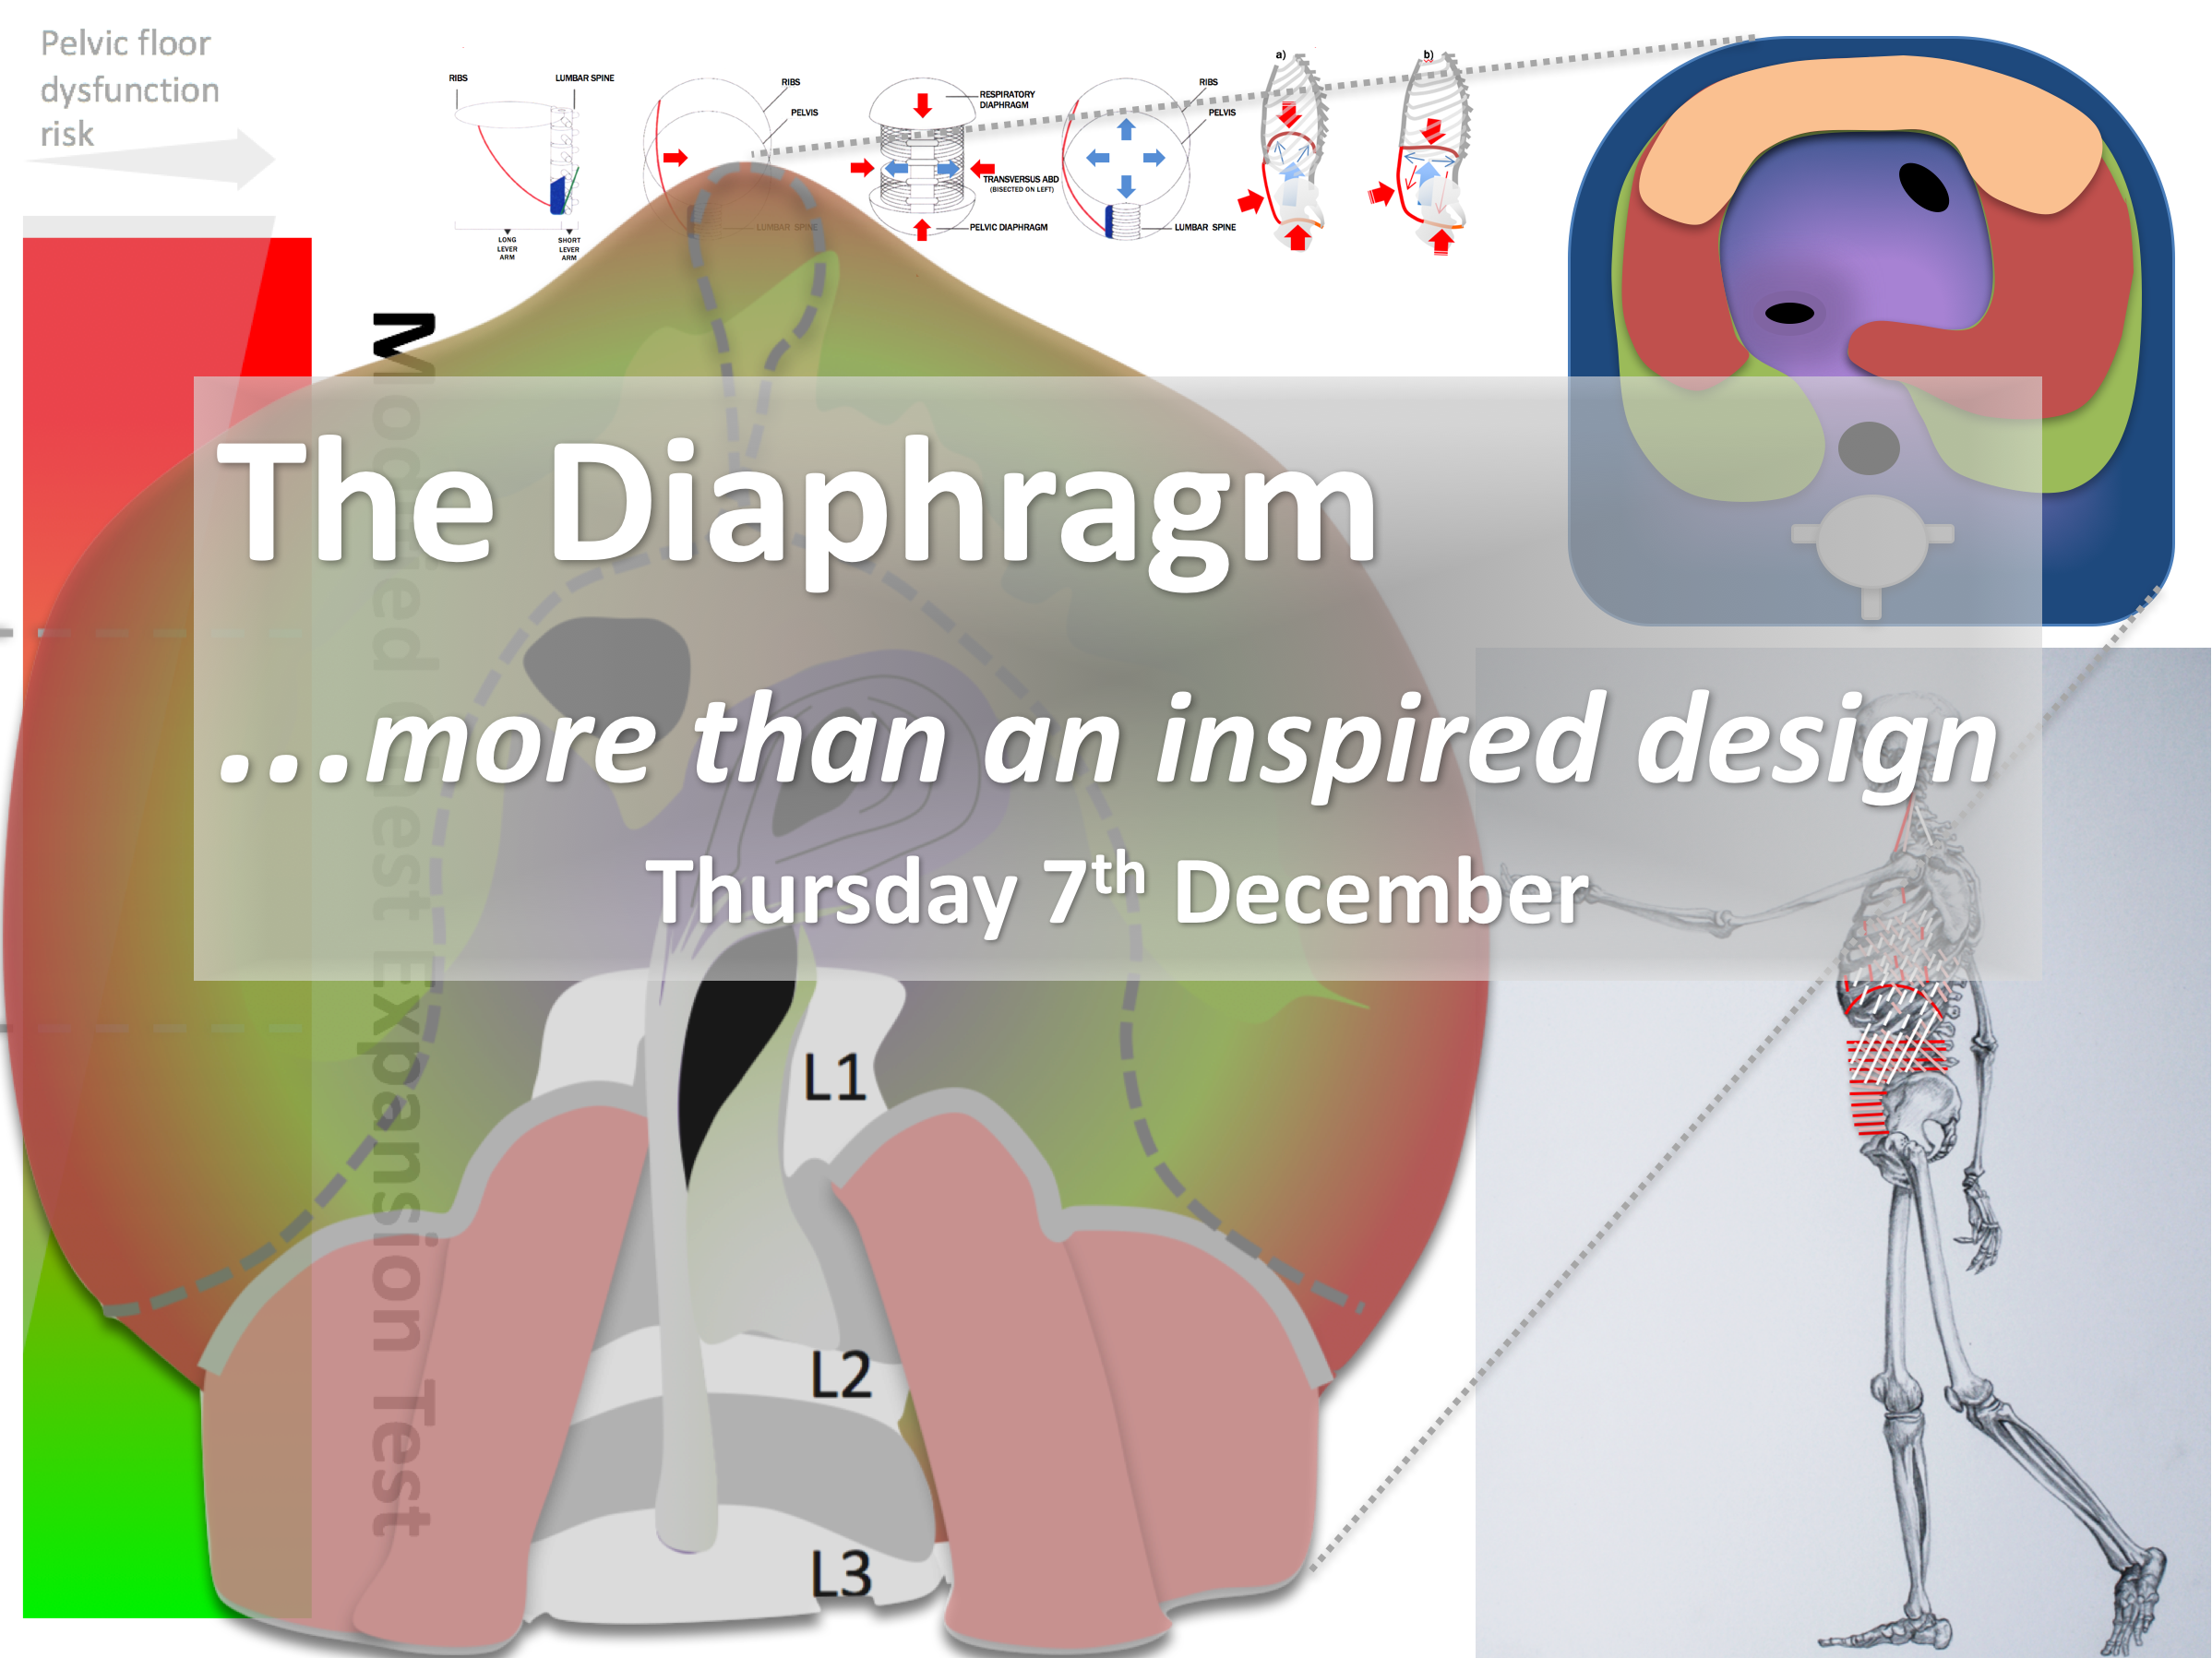 The Diaphragm - more than an inspired design